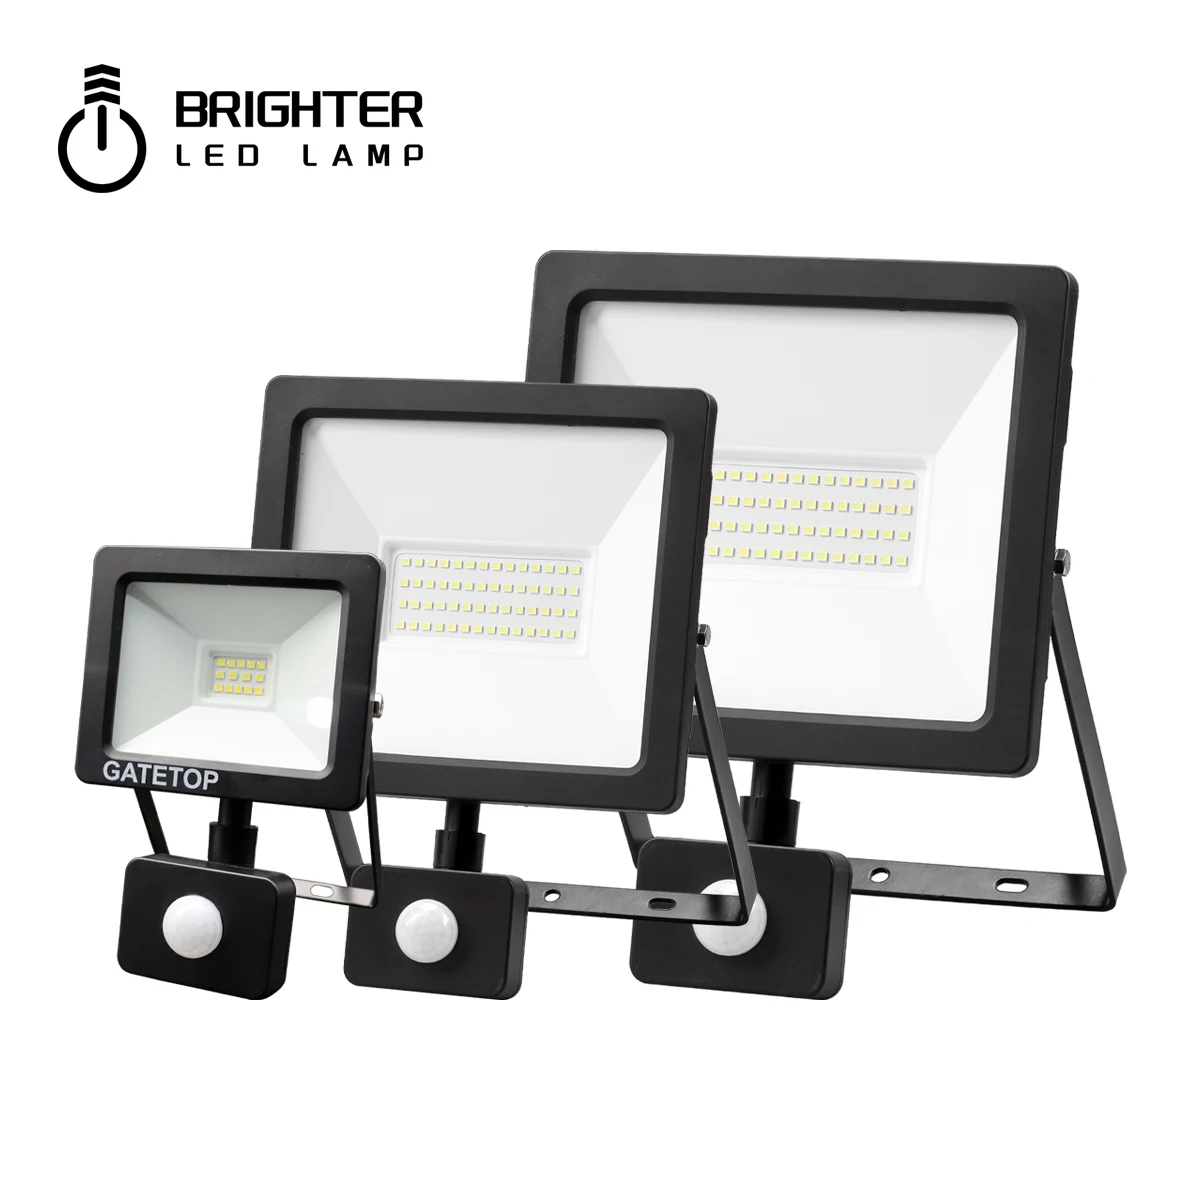 Super Bright Outdoor Lighting 1 Pack Motion Sensor Security & Flood Light 10w 30w 50w For Site Illumination Adjustable Angles cities in motion 2 european vehicle pack